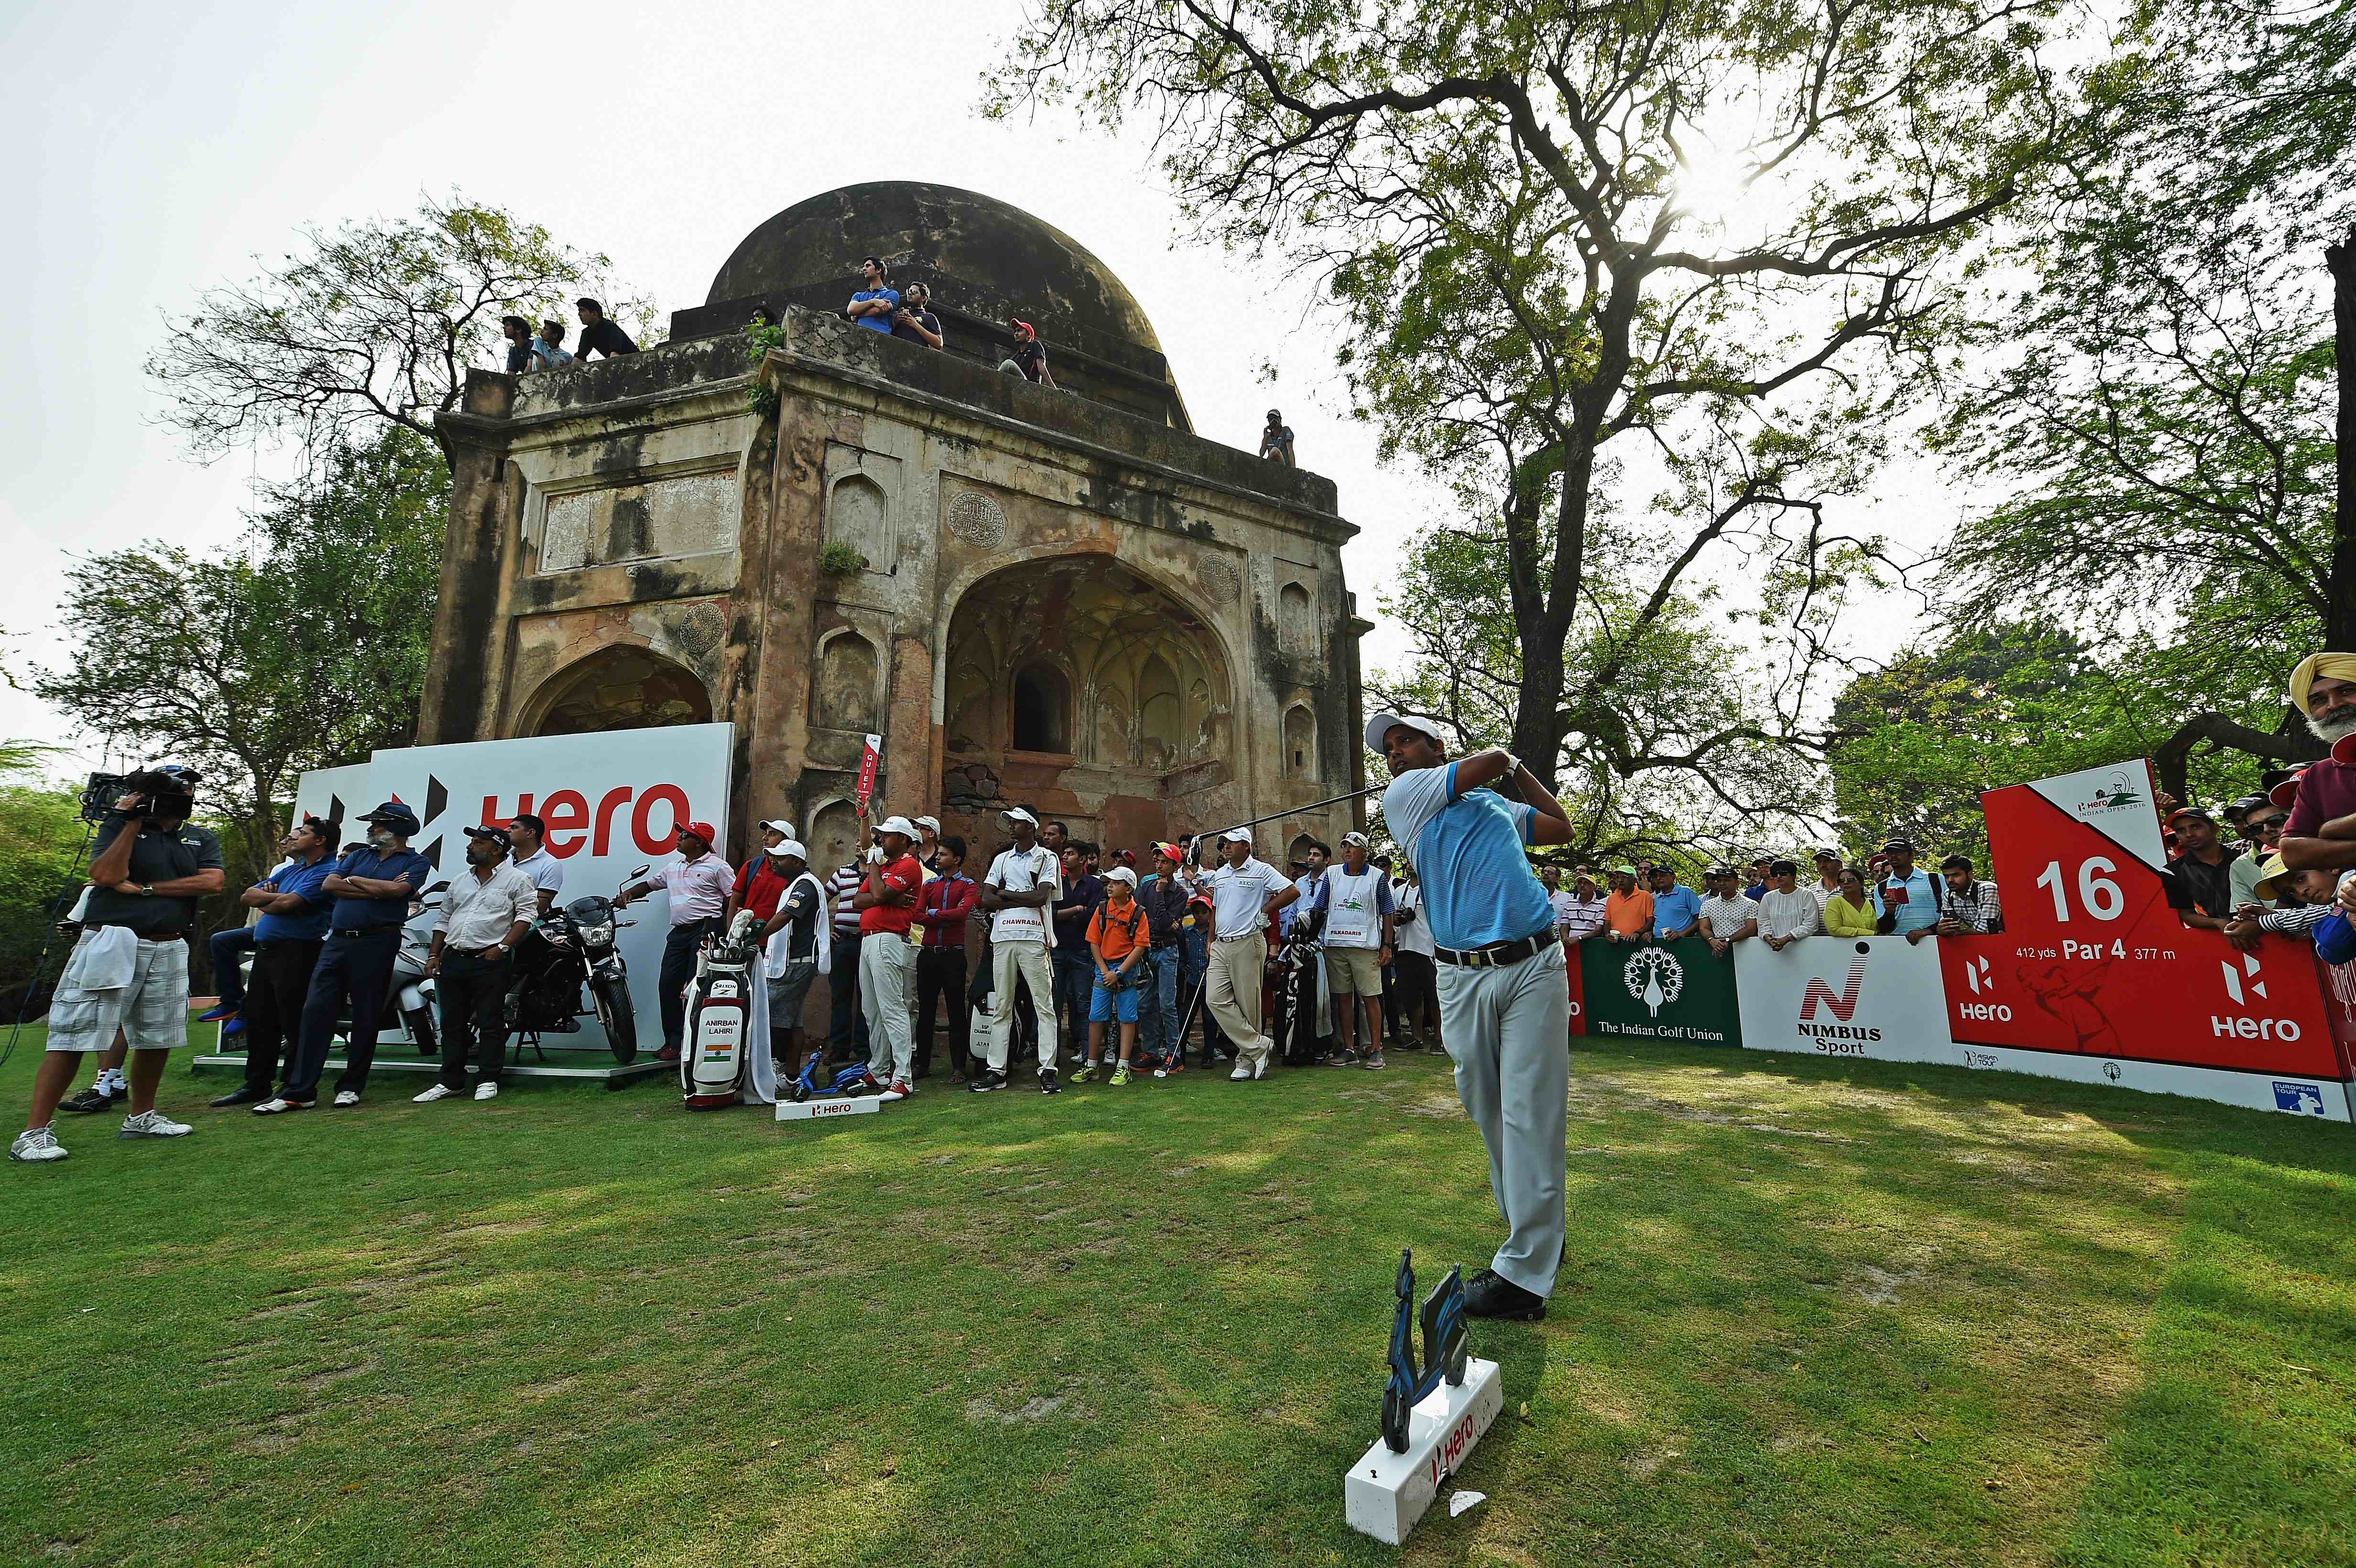 NEW DELHI, INDIA - MARCH 20: SSP Chawrasia of India plays a shot during the fourth round of the Hero Indian Open at Delhi Golf Club on March 20, 2016 in New Delhi, India. (Photo by Stuart Franklin/Getty Images)